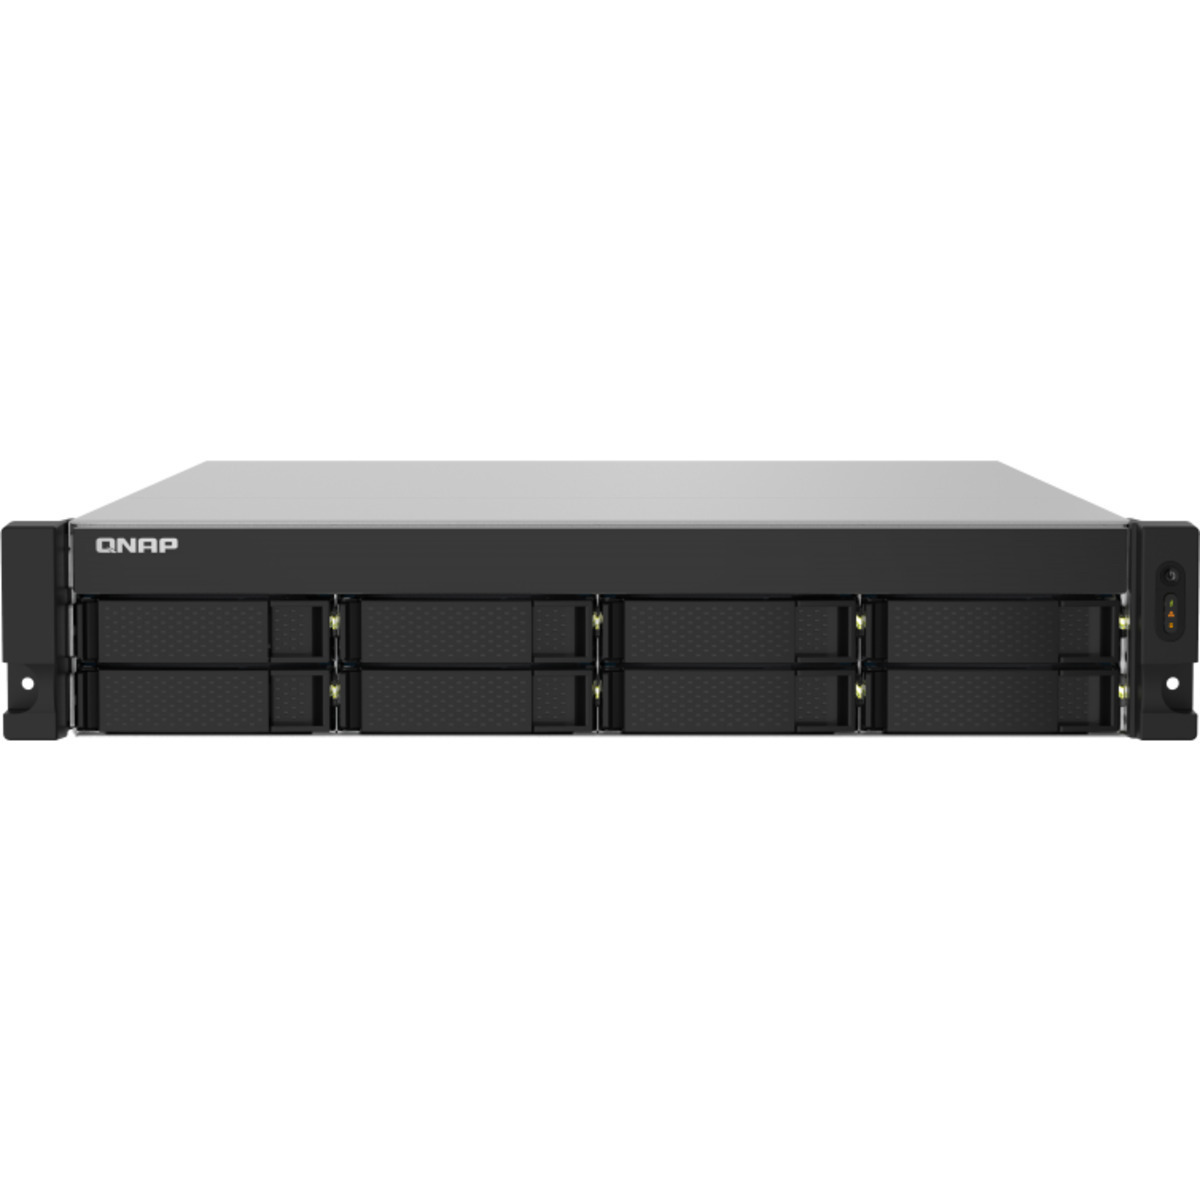 QNAP TS-832PXU 128tb 8-Bay RackMount Personal / Basic Home / Small Office NAS - Network Attached Storage Device 8x16tb Western Digital Gold WD161KRYZ 3.5 7200rpm SATA 6Gb/s HDD ENTERPRISE Class Drives Installed - Burn-In Tested - FREE RAM UPGRADE TS-832PXU